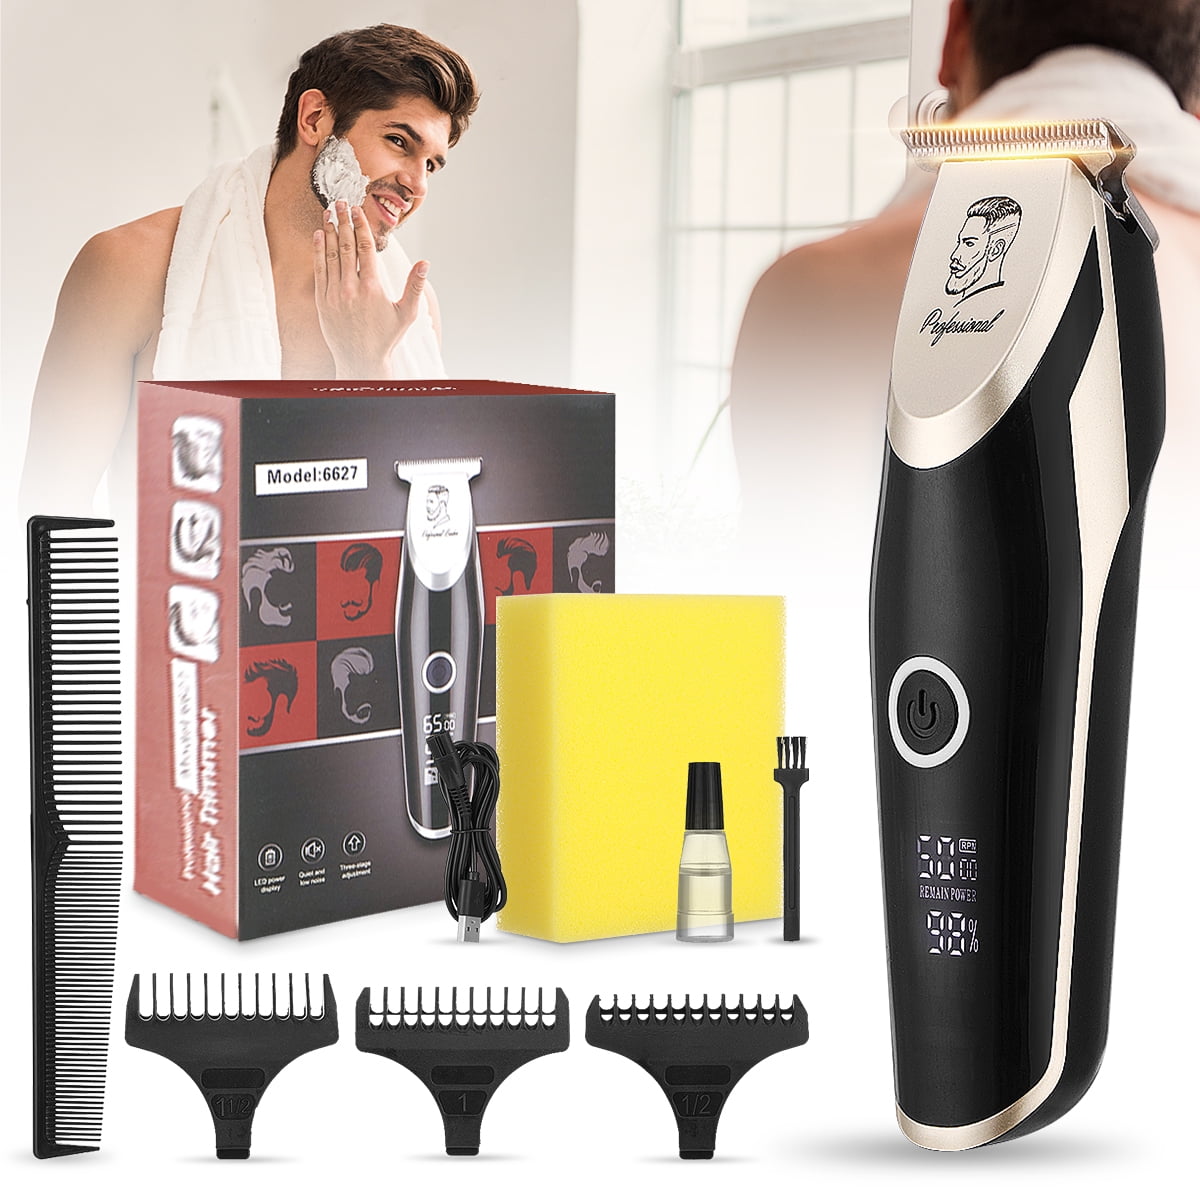 Hair Clippers for Men, Professional Electric Hair Trimmer Hair Clipper Cutting Machine Hairdressing Tool Oil Head Electric Clippers Barbershop - 2